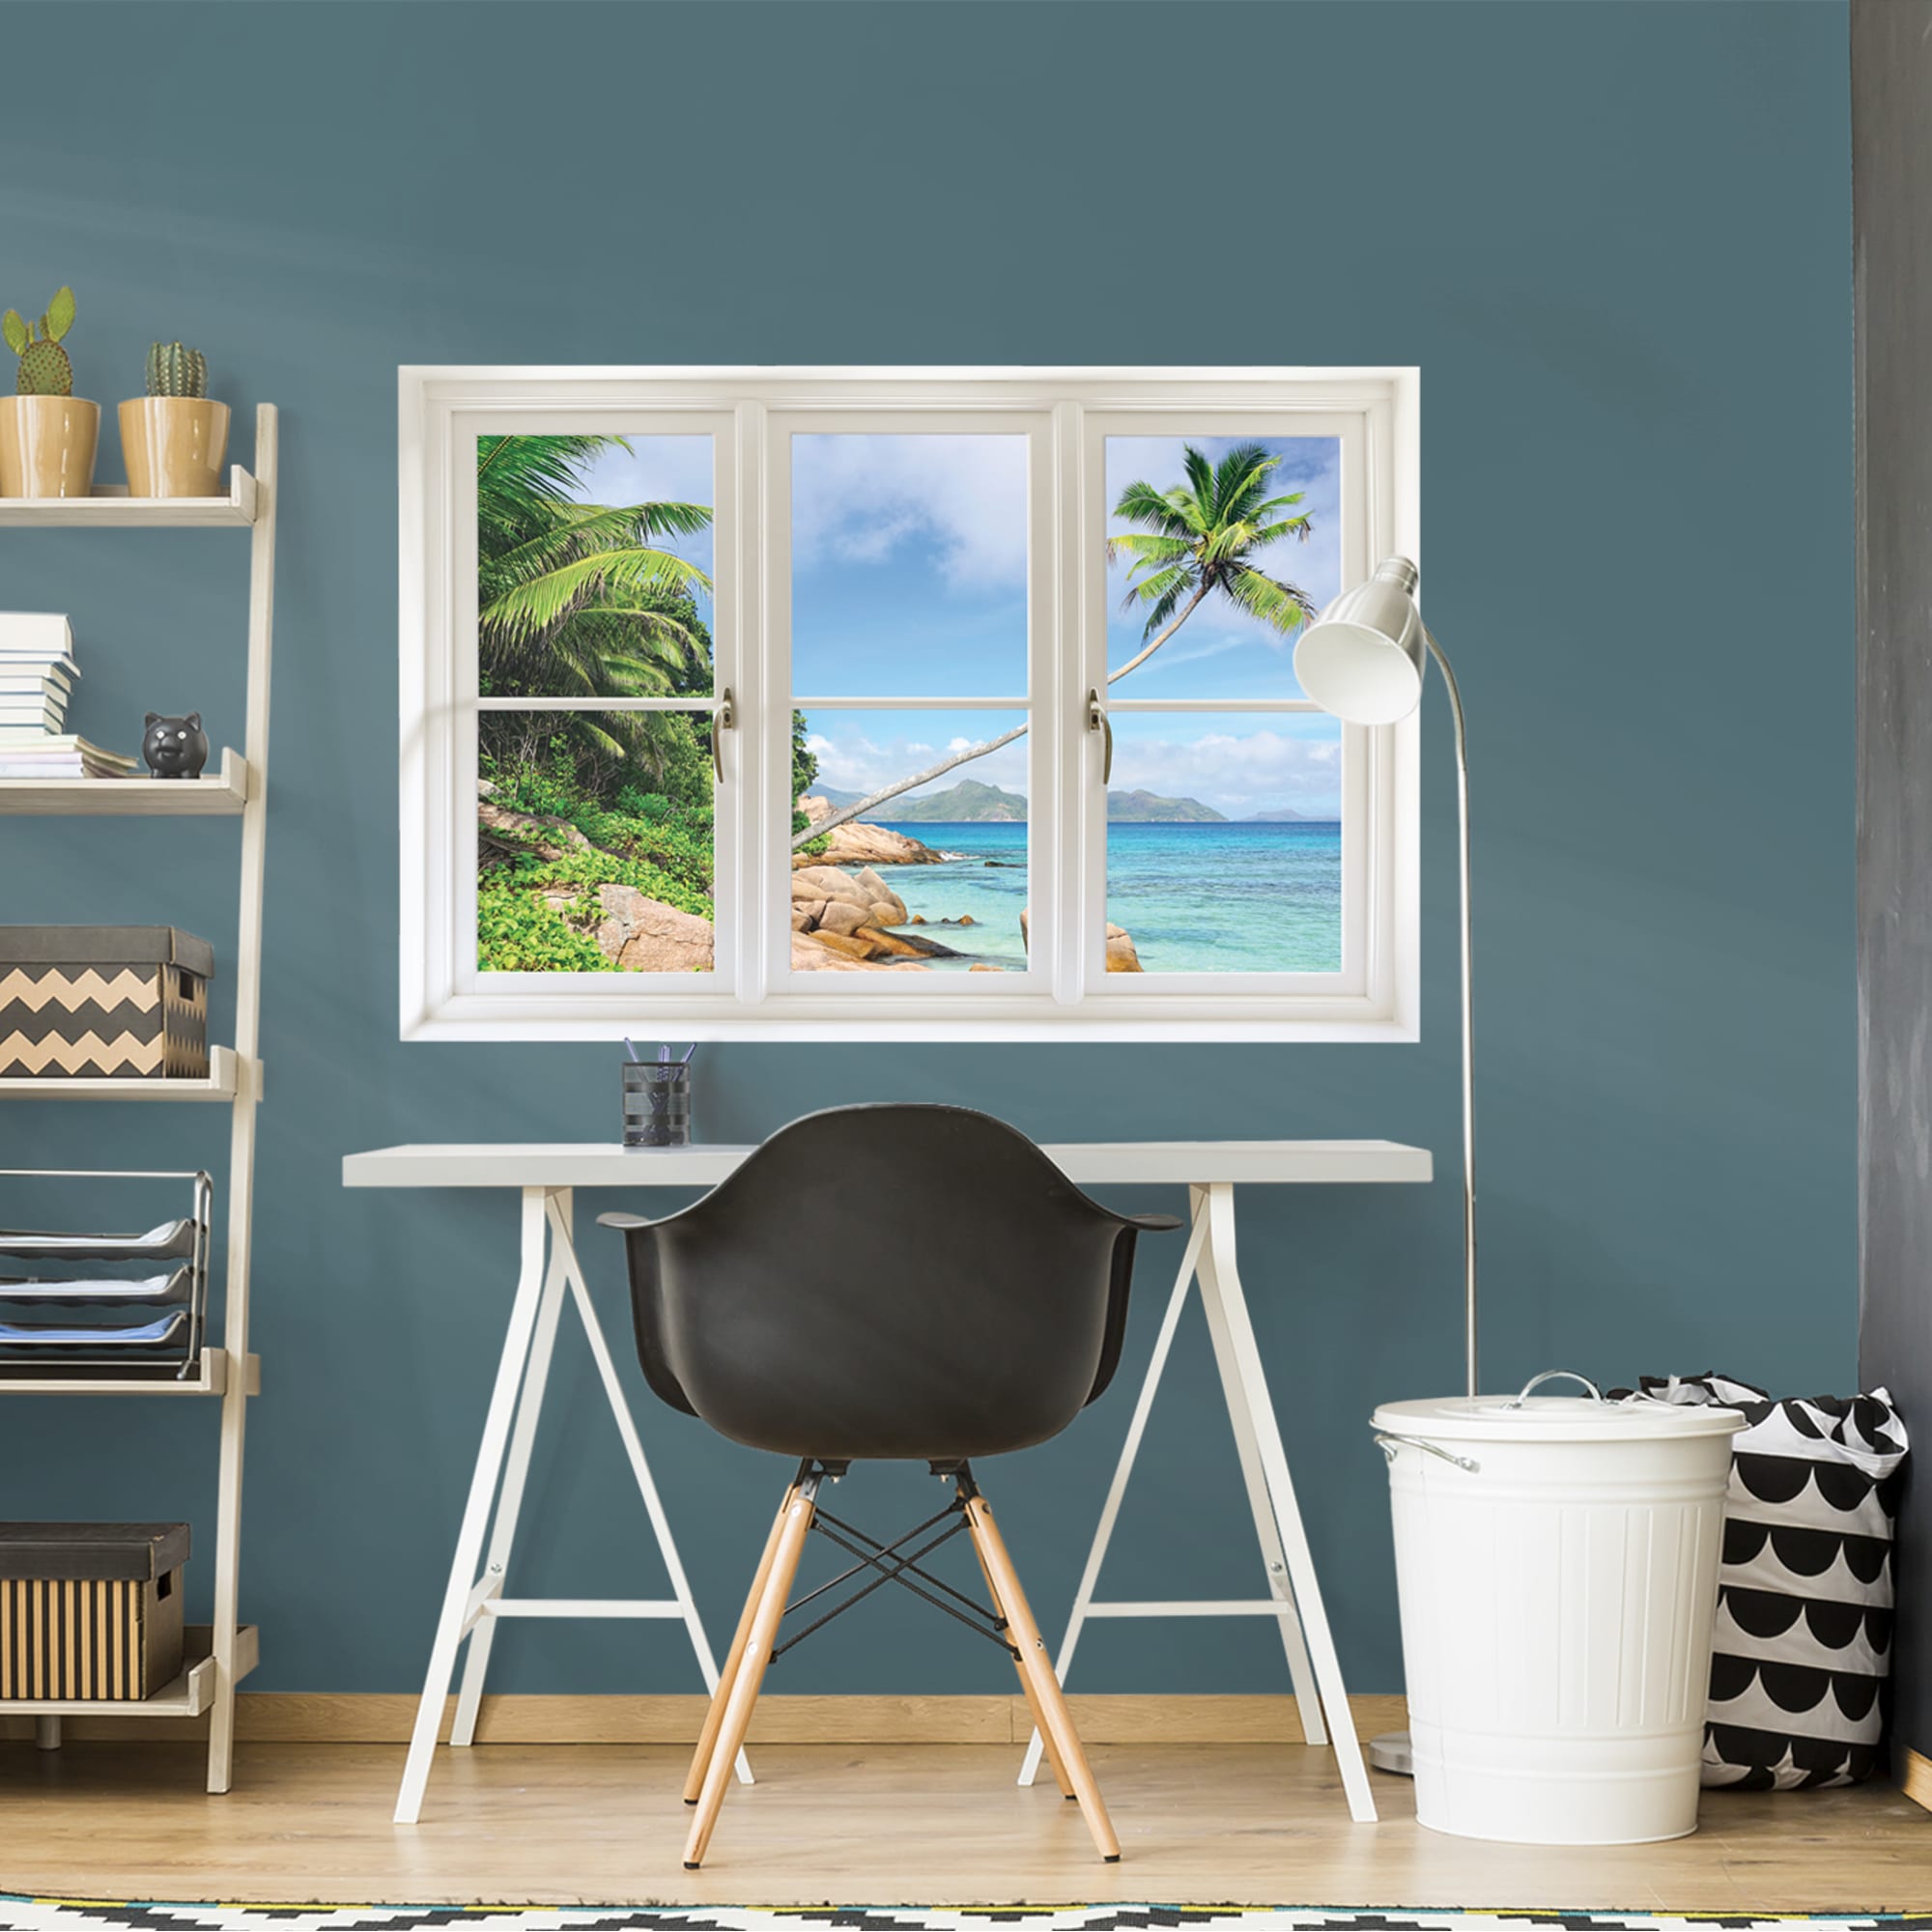 Instant Window: Tropical Beach, Seychelles - Removable Wall Graphic 51.0"W x 34.0"H by Fathead | Vinyl